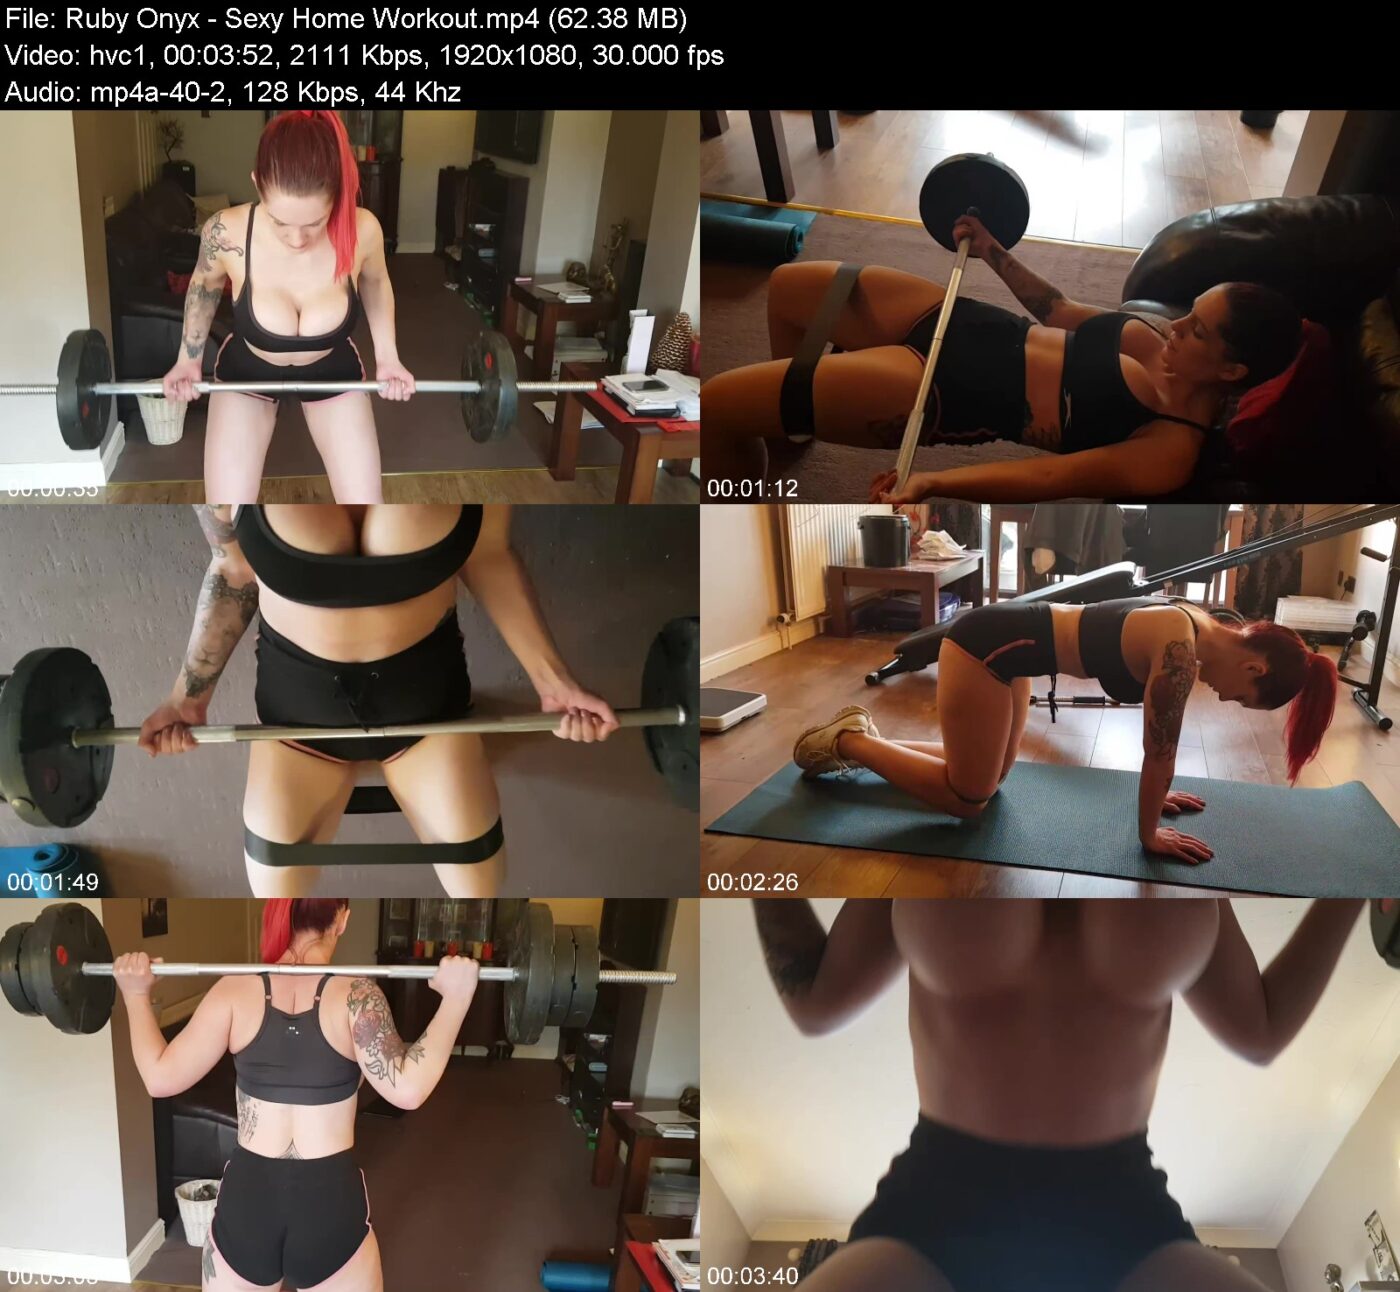 Actress: Ruby Onyx. Title and Studio: Sexy Home Workout